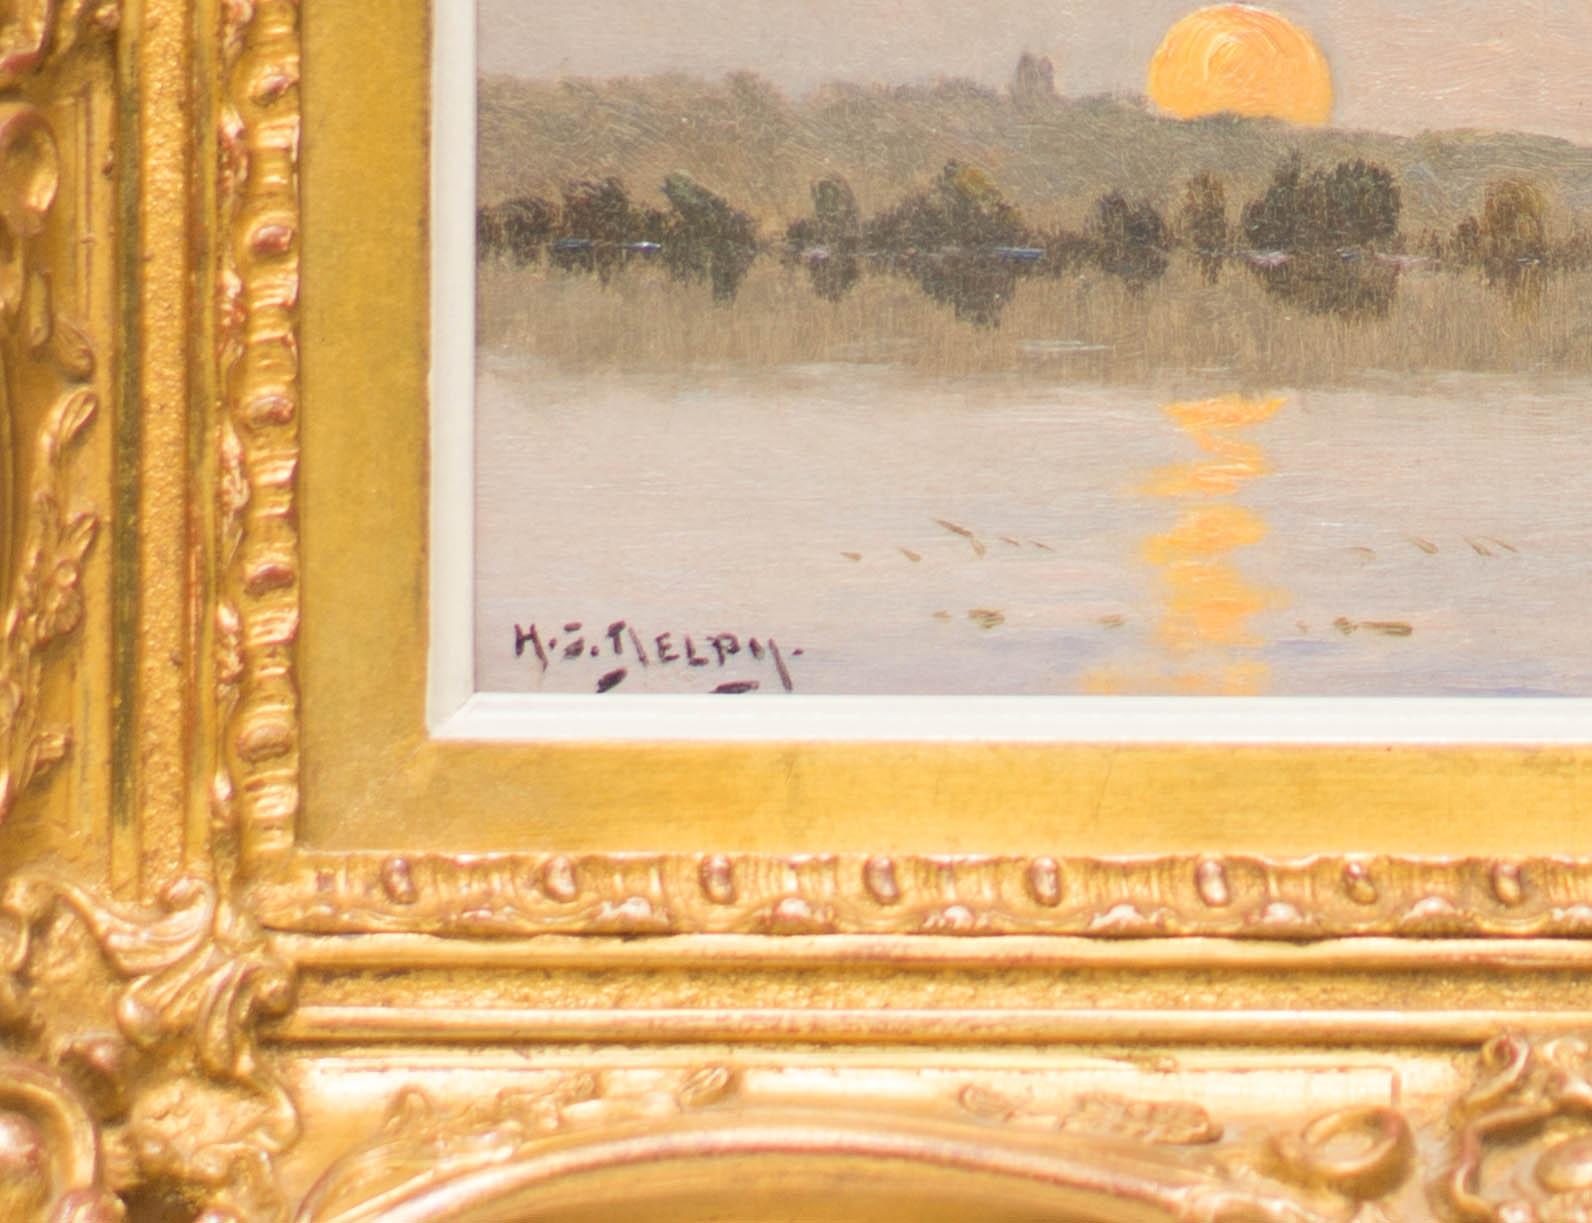 Sunset on the River - Painting by Hippolyte Camille Delpy